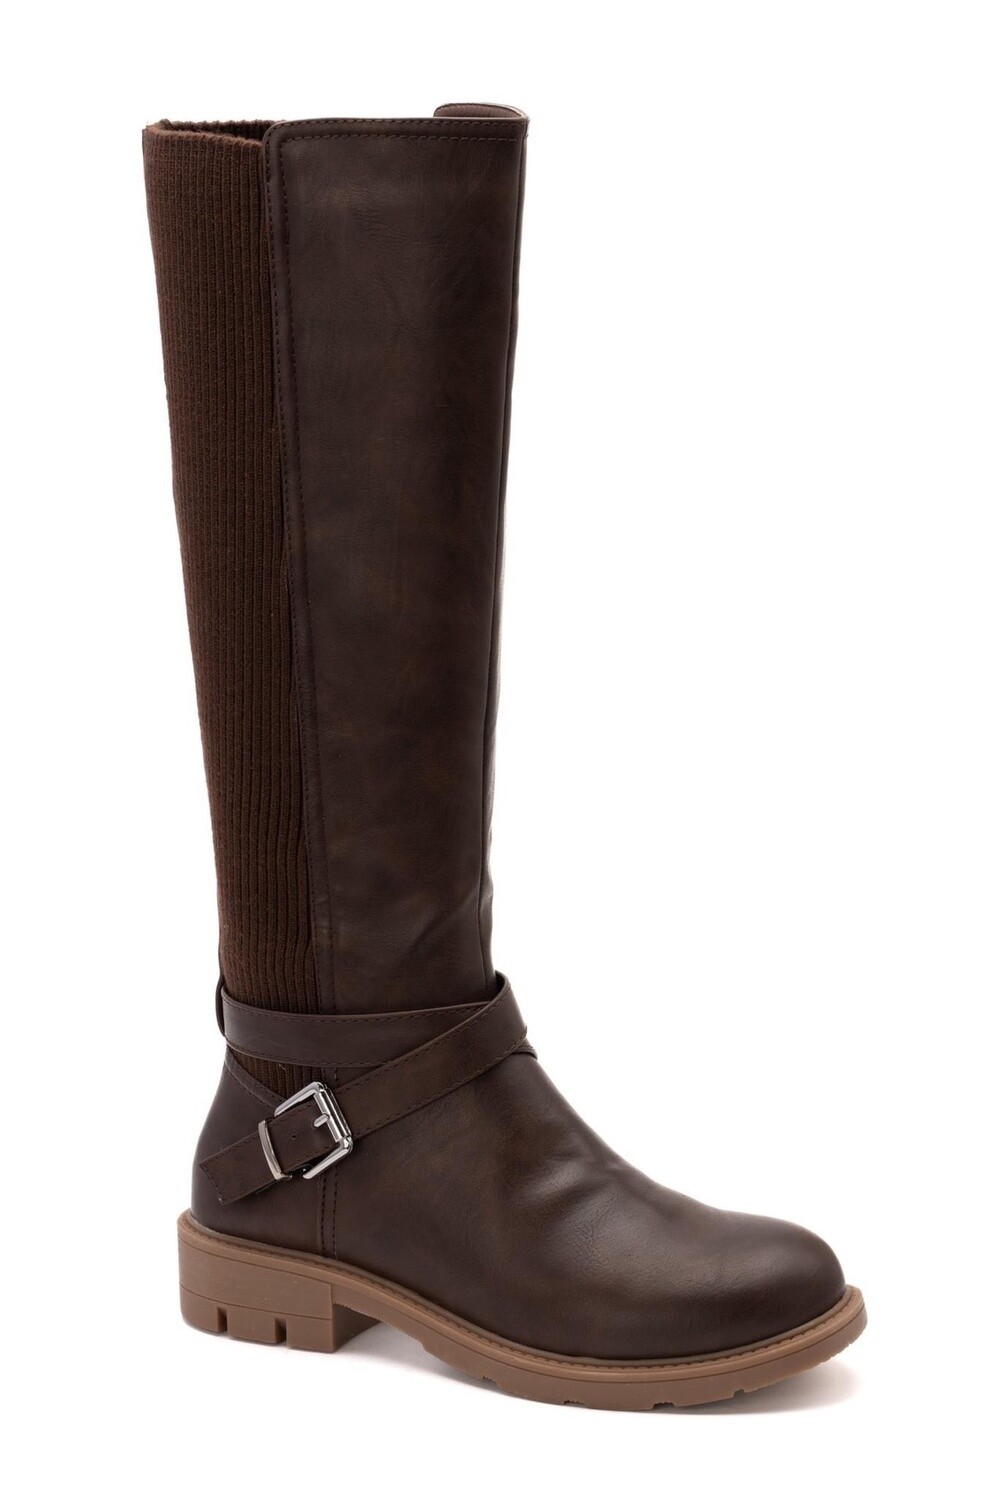 Corkys Boutique Hayride Chocolate Boot